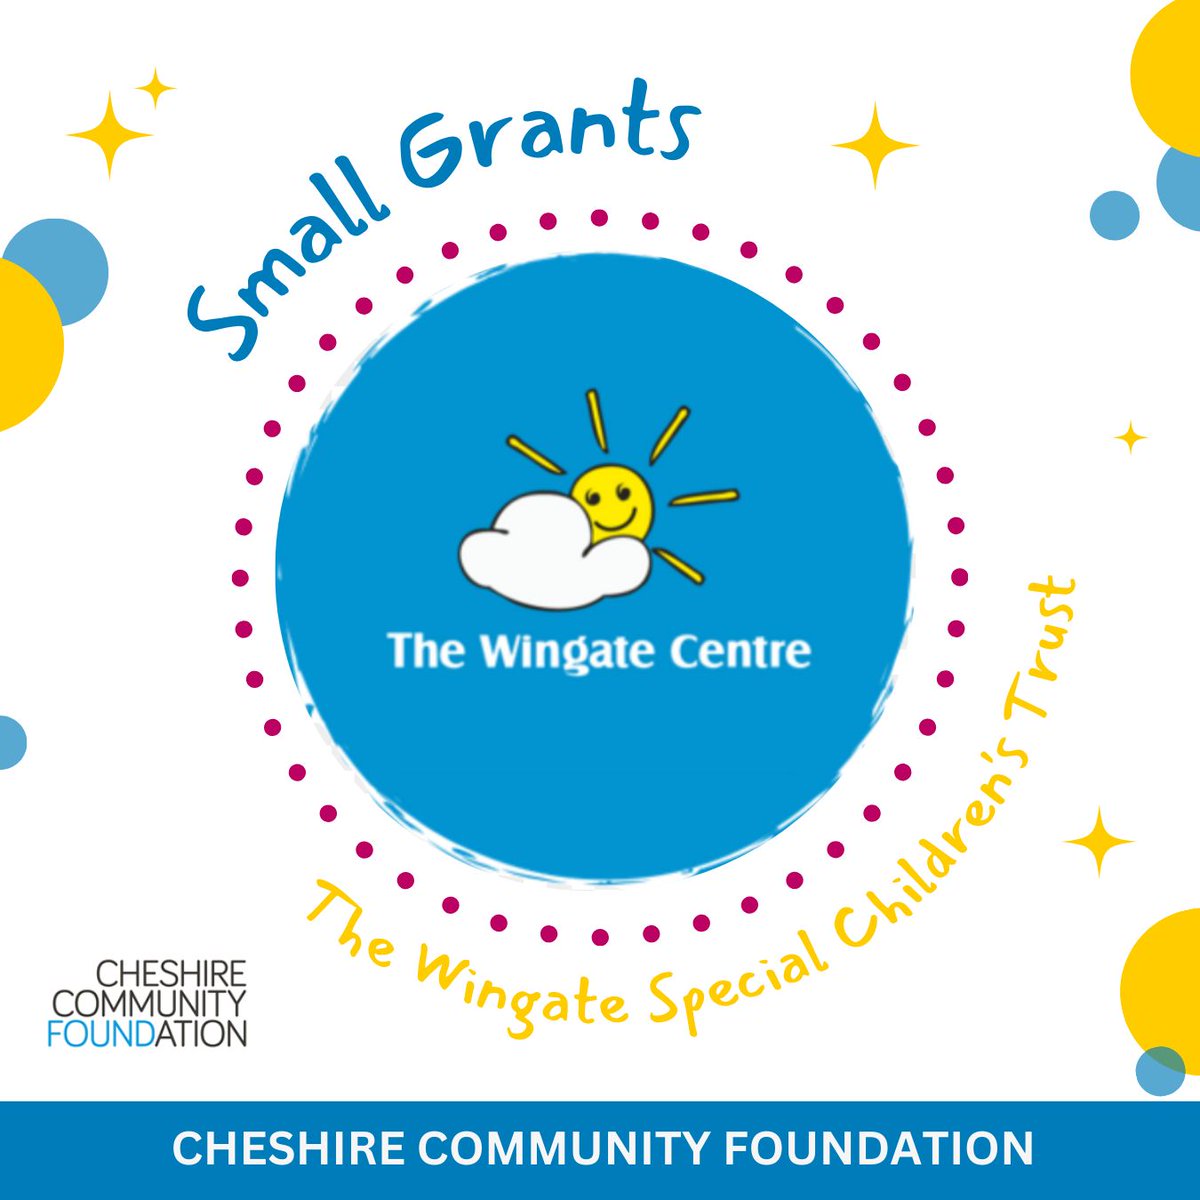 The Wingate Centre was awarded a grant from CCF in September - the grant will be used to run ‘The Cookery Project’, providing cooking sessions for young adults of all disabilities. The group activity will be inclusive, fun and friendly